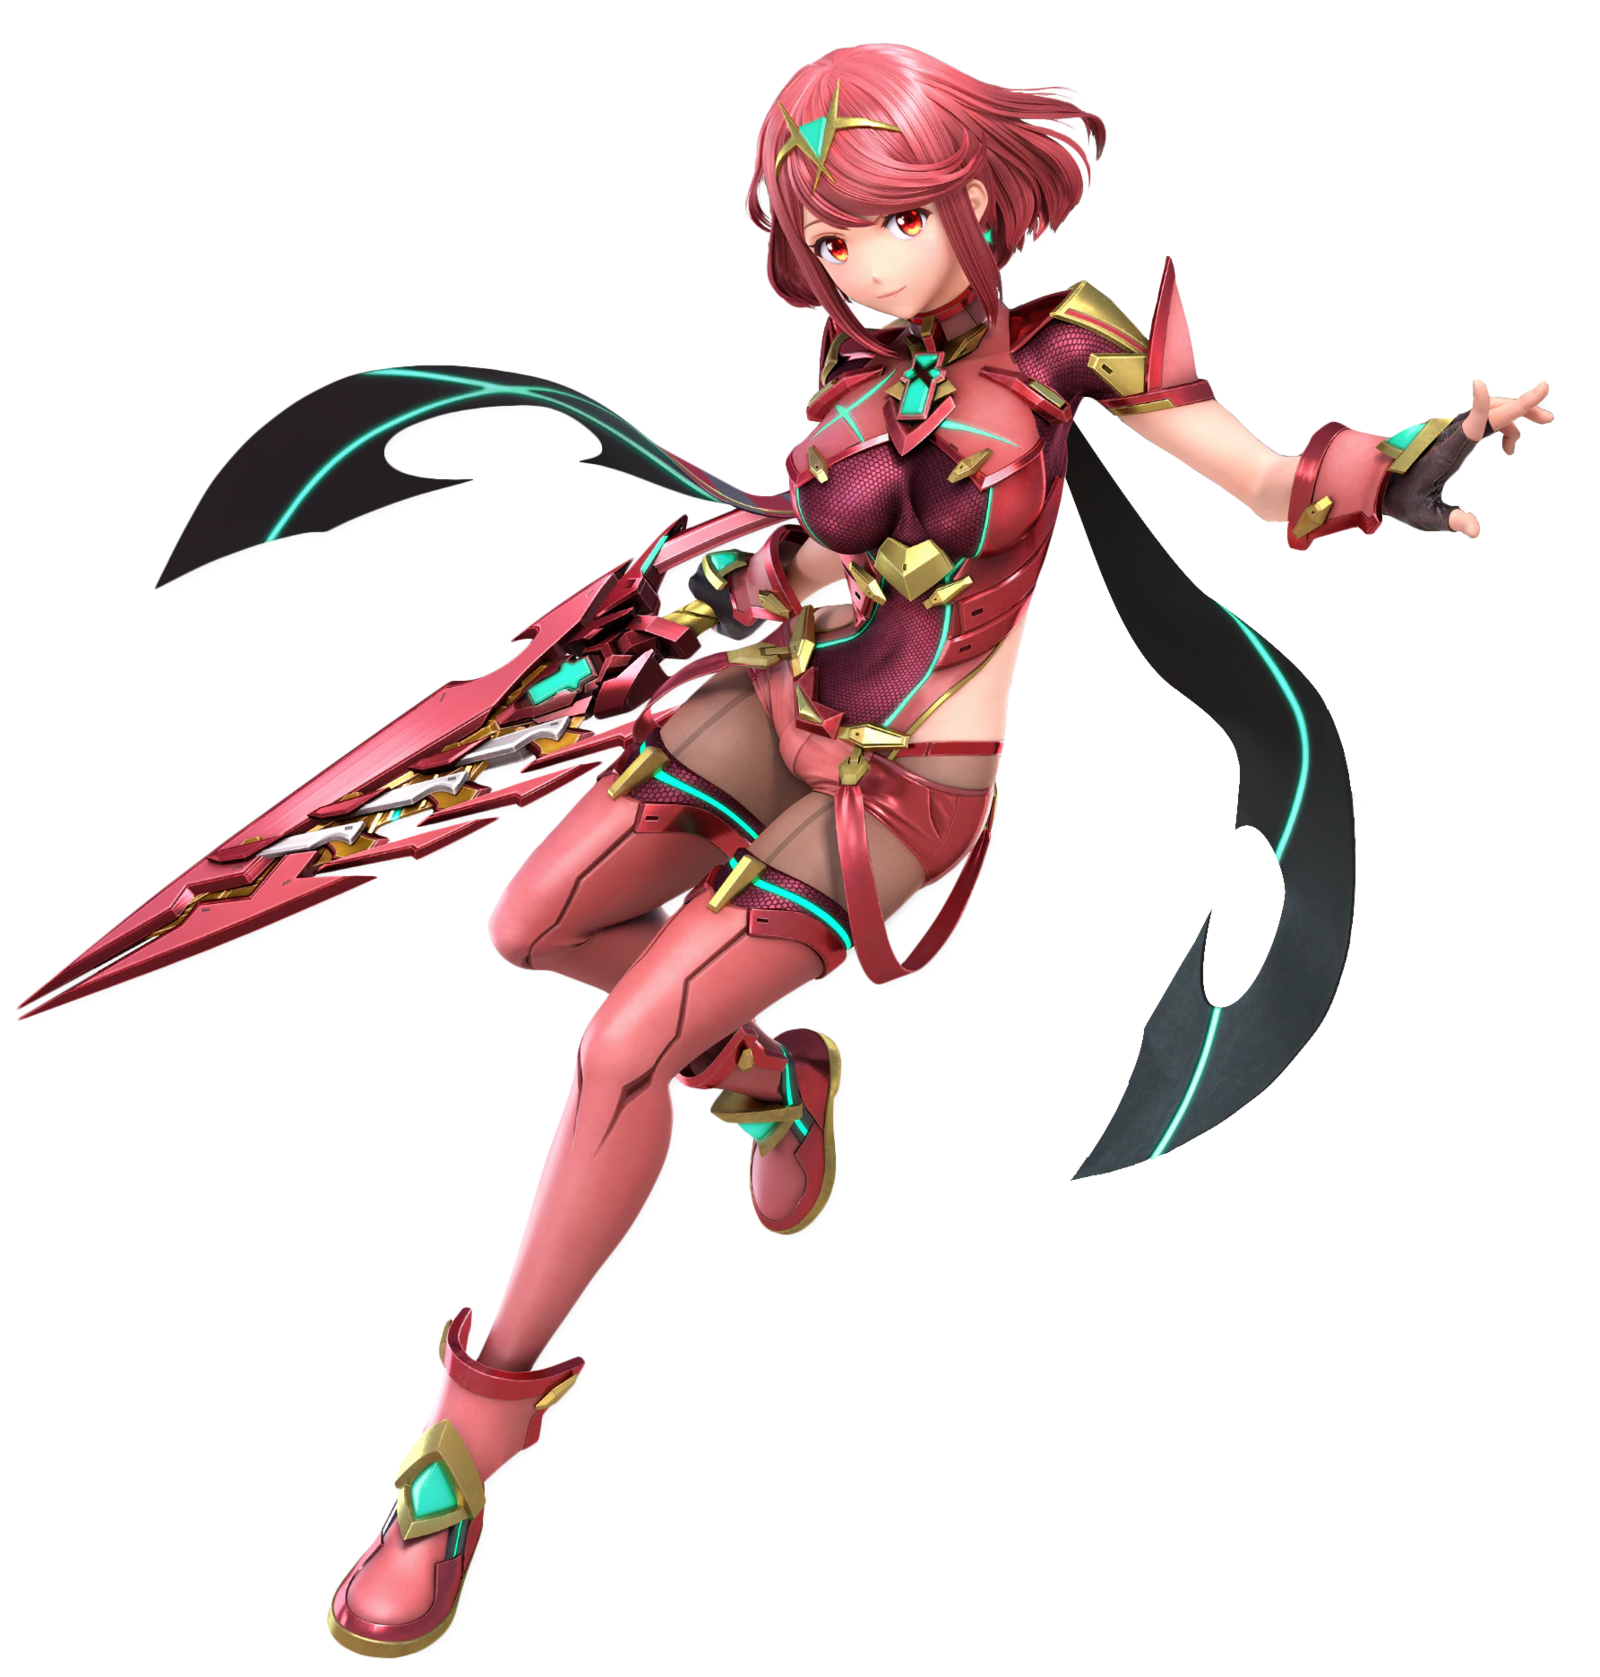 Super Smash Bros. Ultimate Pyra. Select this character for for counters, counter tips, and more!